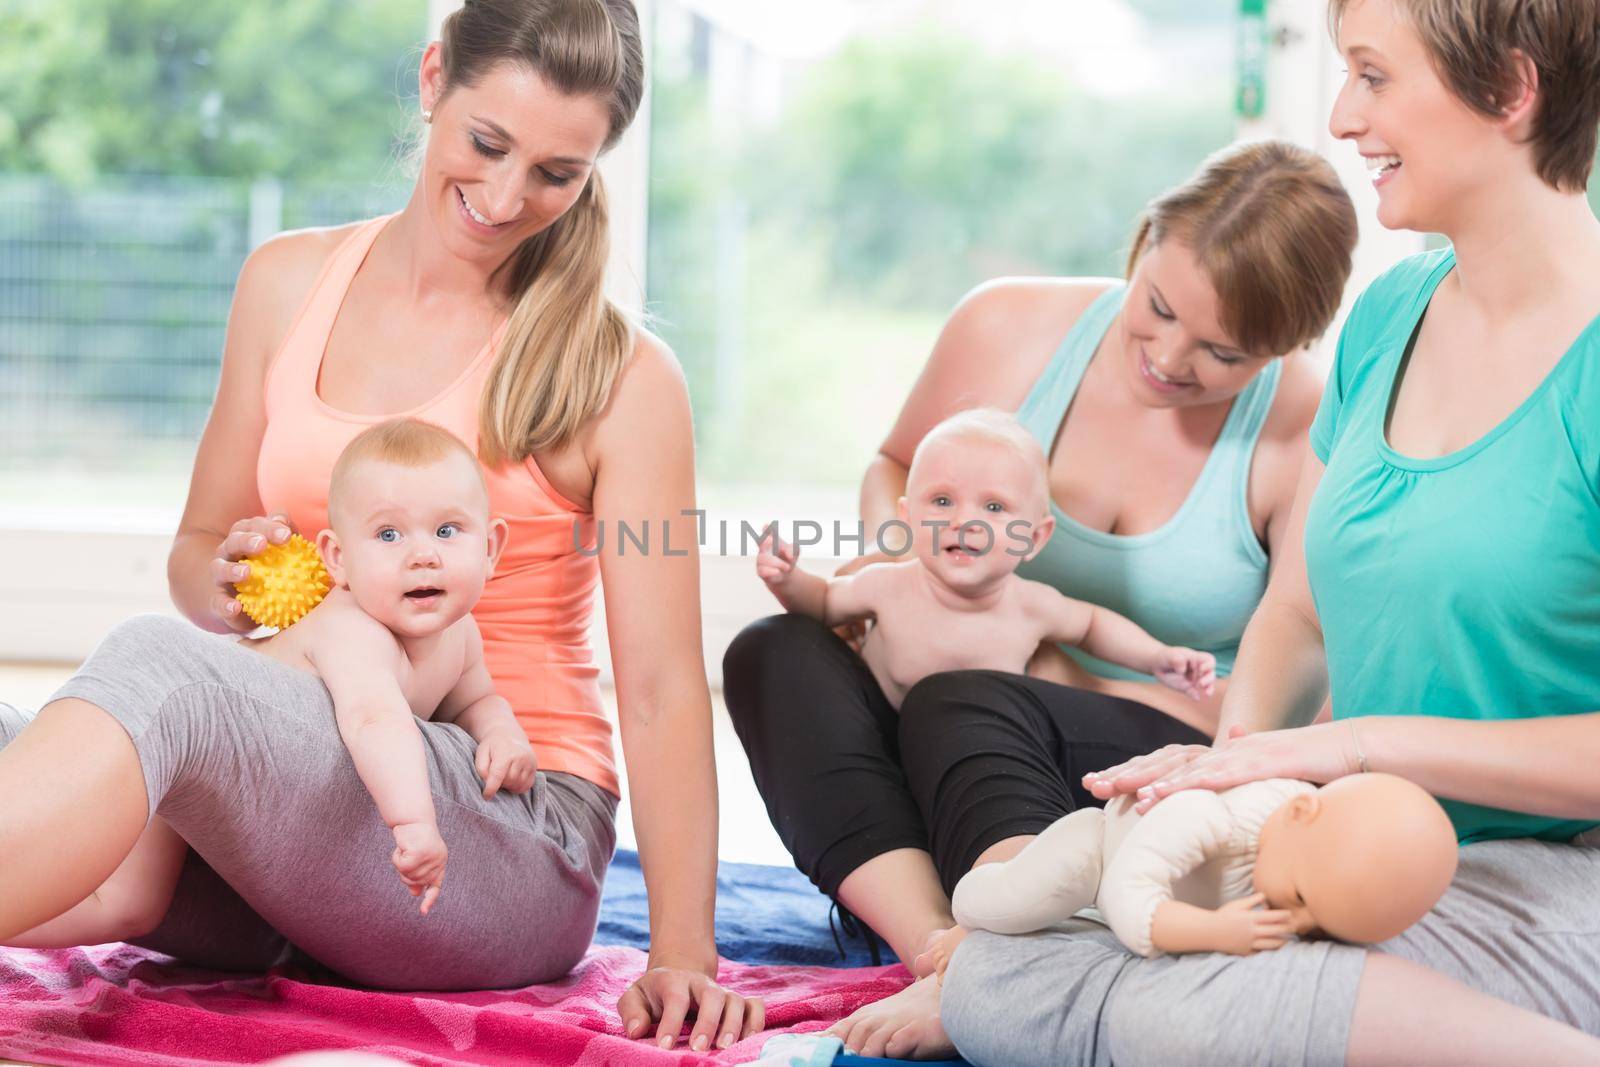 Young women practicing massage for their babies by Kzenon